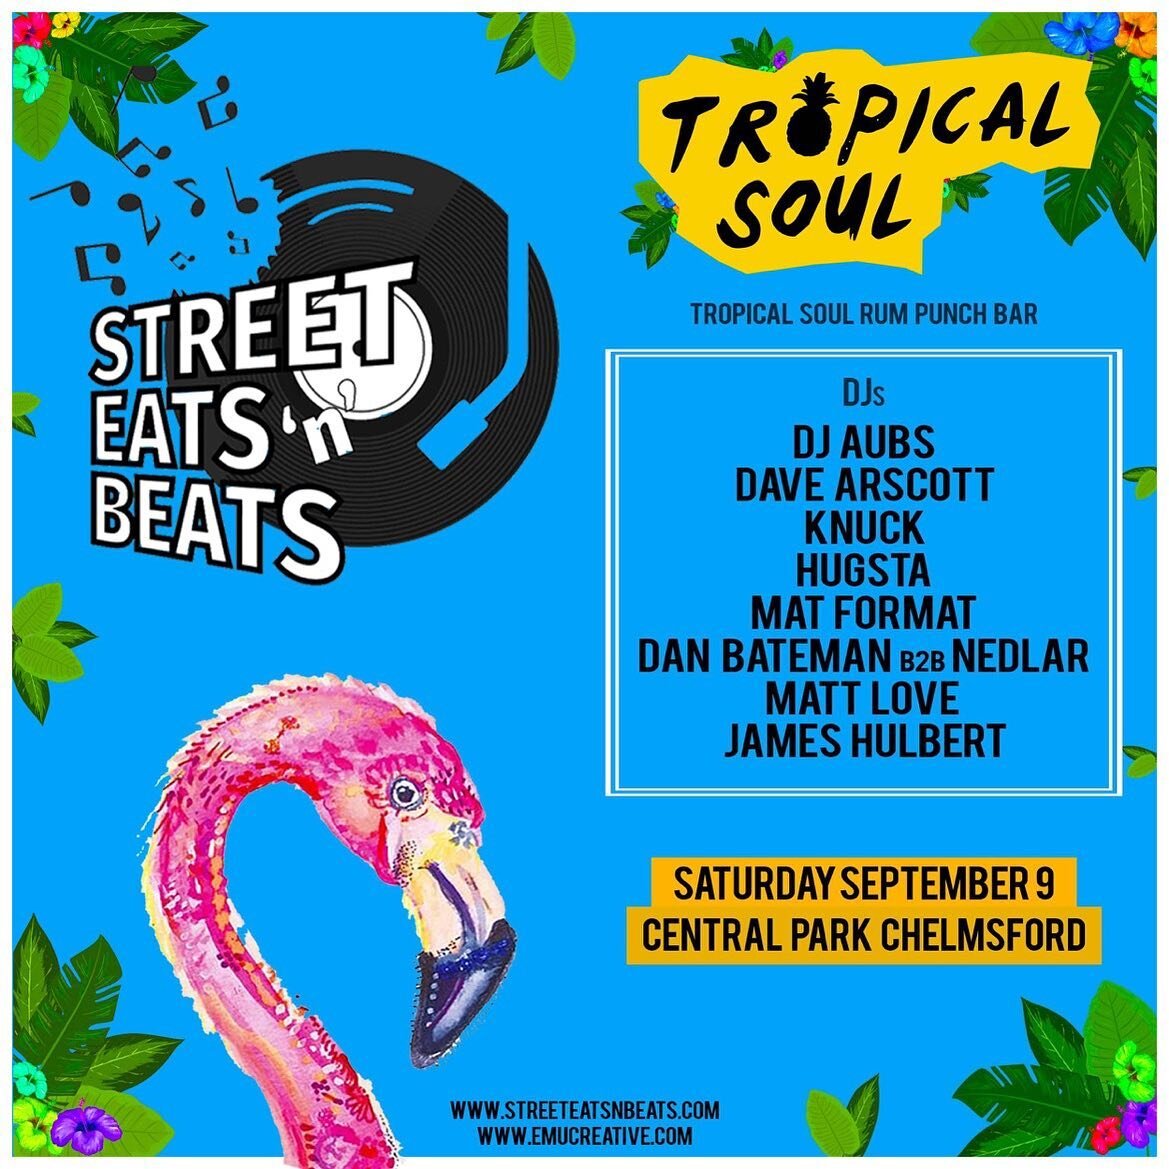 We&rsquo;re very excited to be back at @streeteatsnbeats_festival with our @tropicalsouluk rum bar for another great year! 

Some of the best local DJs will be gracing the decks all day and evening. 

#chelmsford #event #rumbar #eatstreetsnbeats #ess